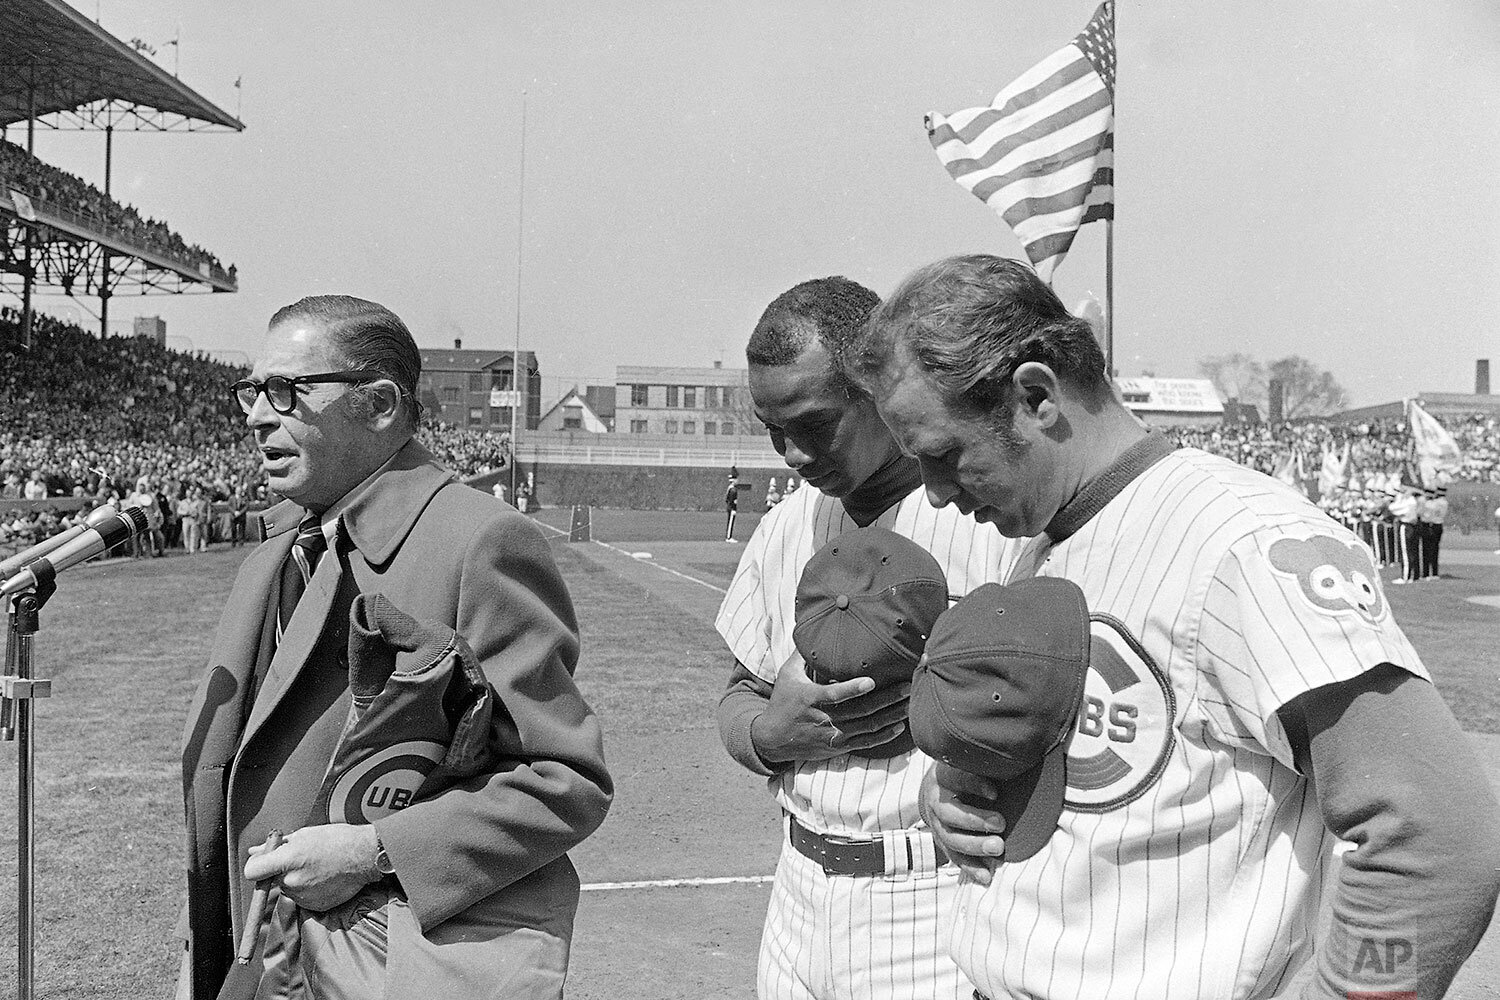  Chicago Cubs co-captains Ernie Banks and Ron Santo, right, bow heads as master of ceremonies Milton Berle leads opening-day crowd in prayer for safe return of Apollo 13 astronauts Tuesday, April 14, 1970 in Chicago. Cubs played Philadelphia before a